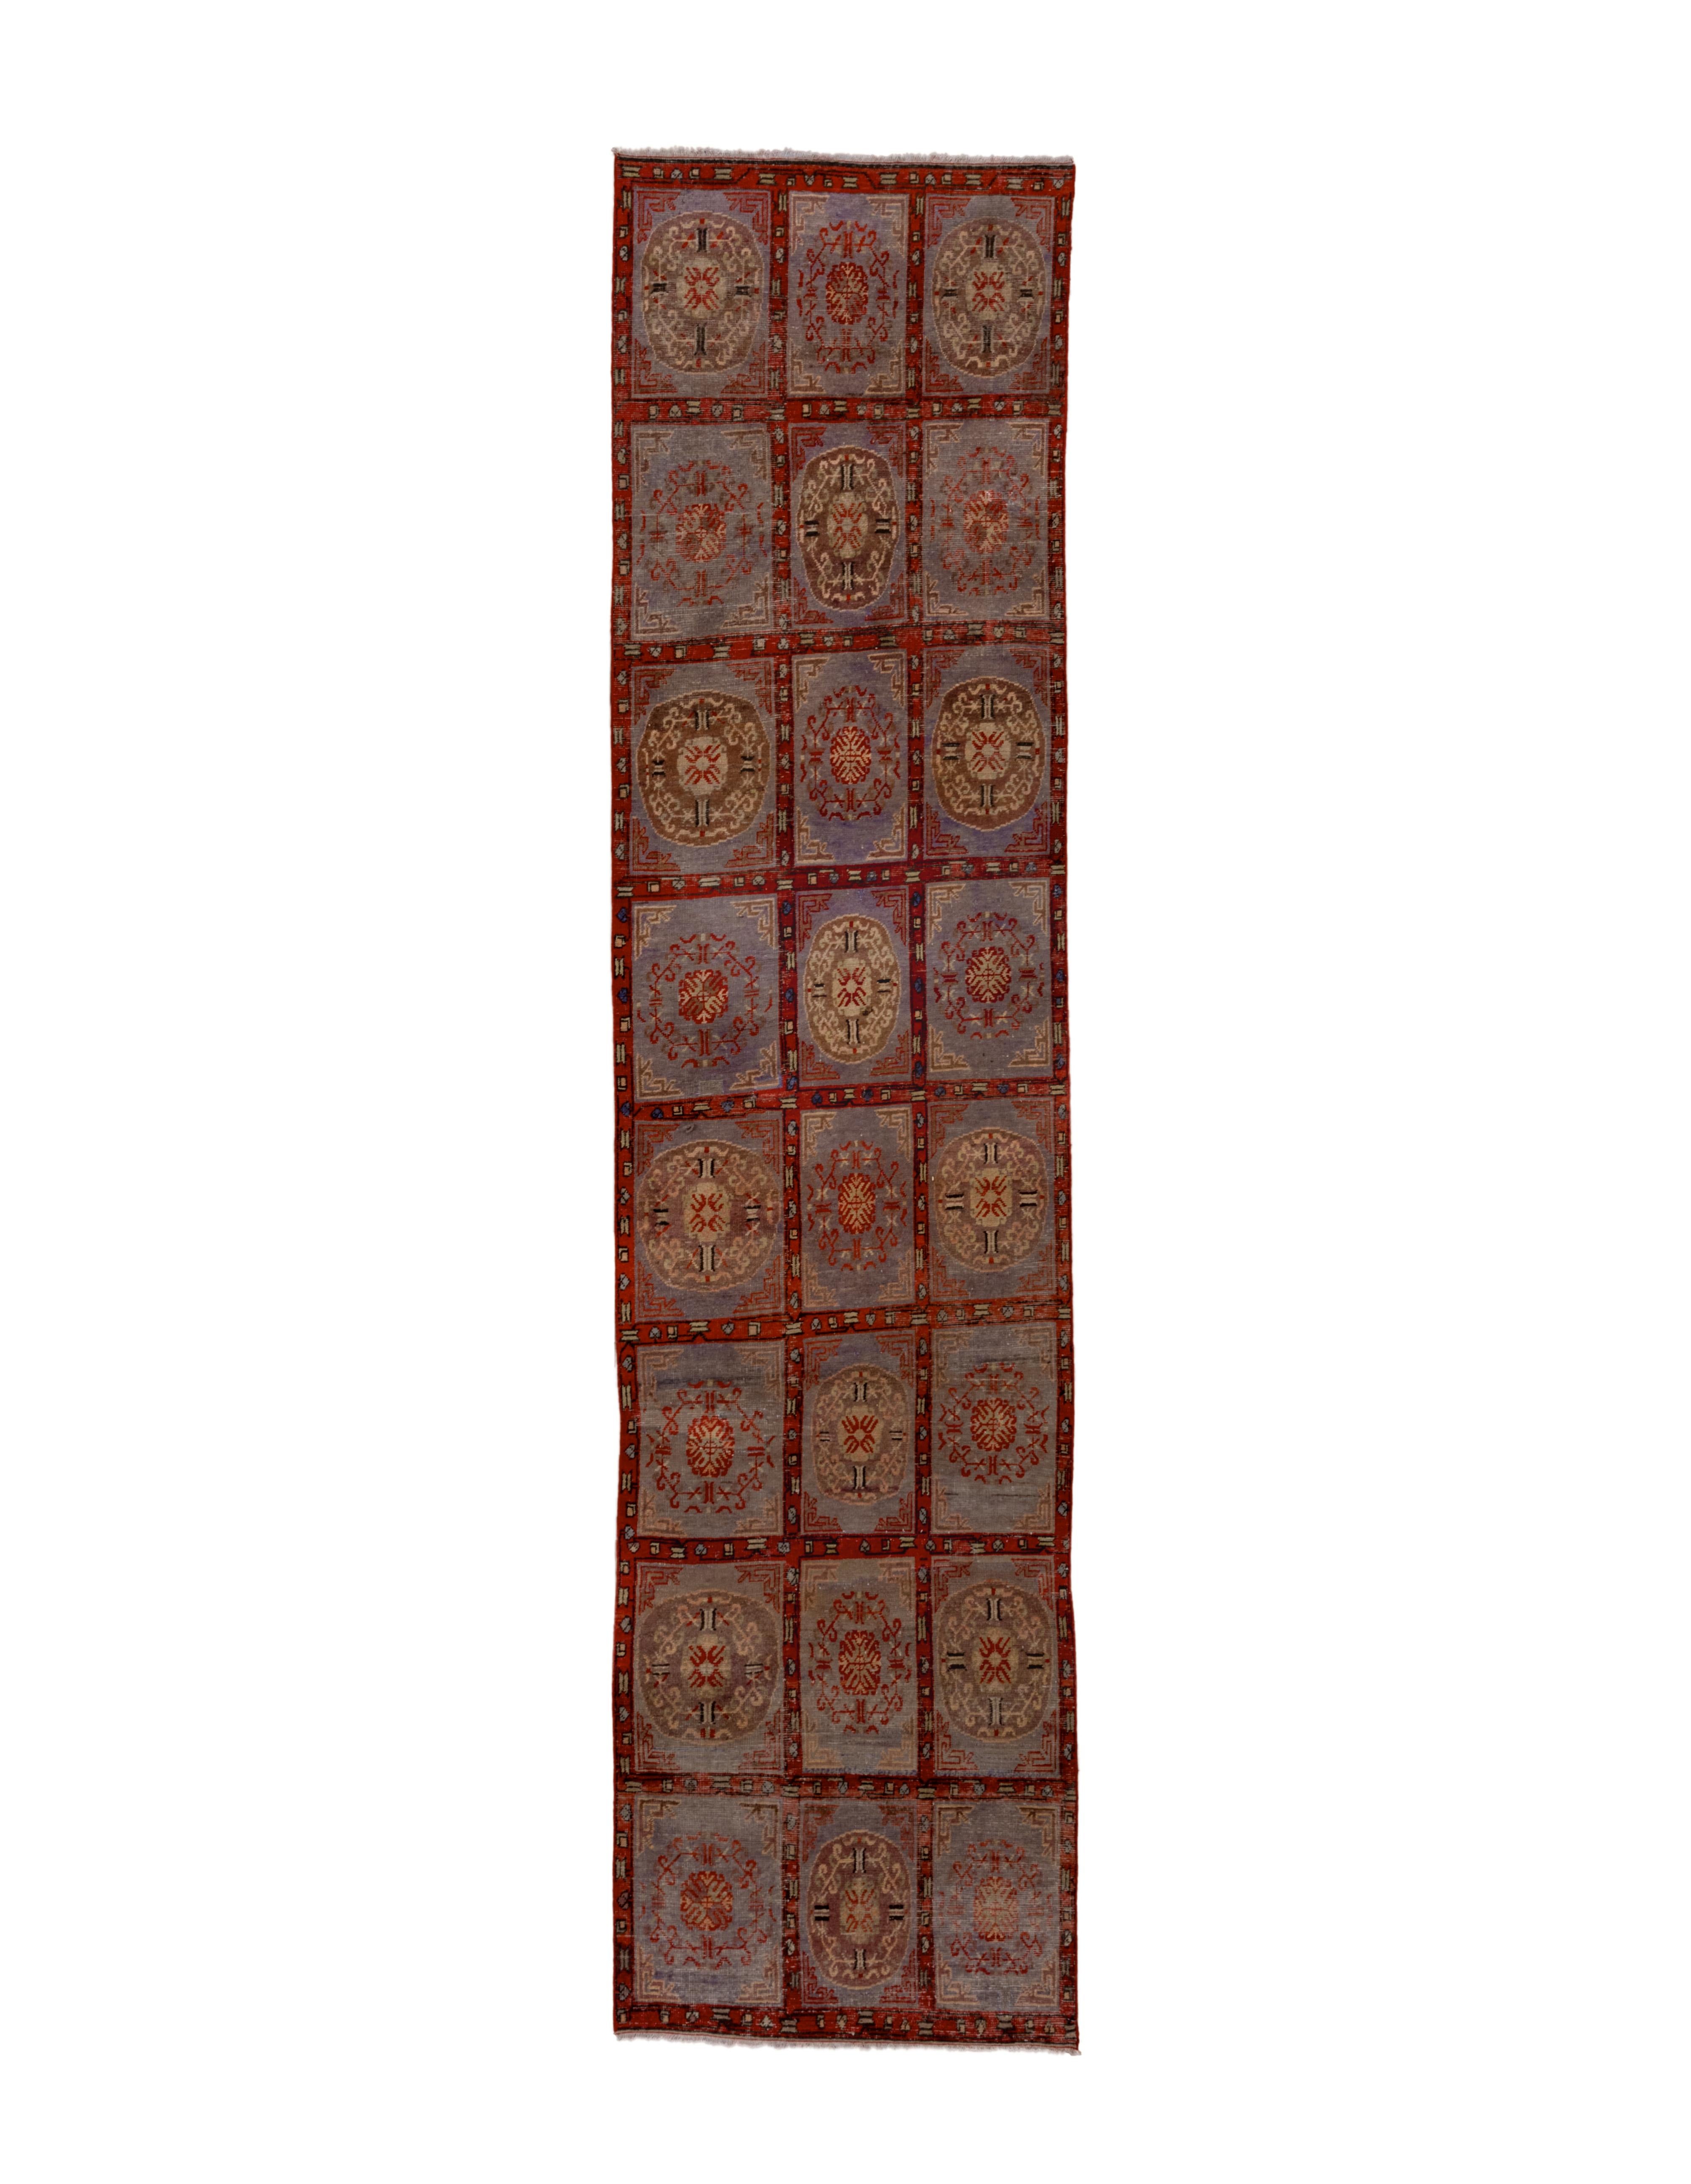 This unusual east Turkestan kenare shows a windowpane field in a three by eight array, all on a light blue ground, with alternations of roundel “moon” medallions with circular openwork wreaths. The narrow border shows the same pattern as the panel